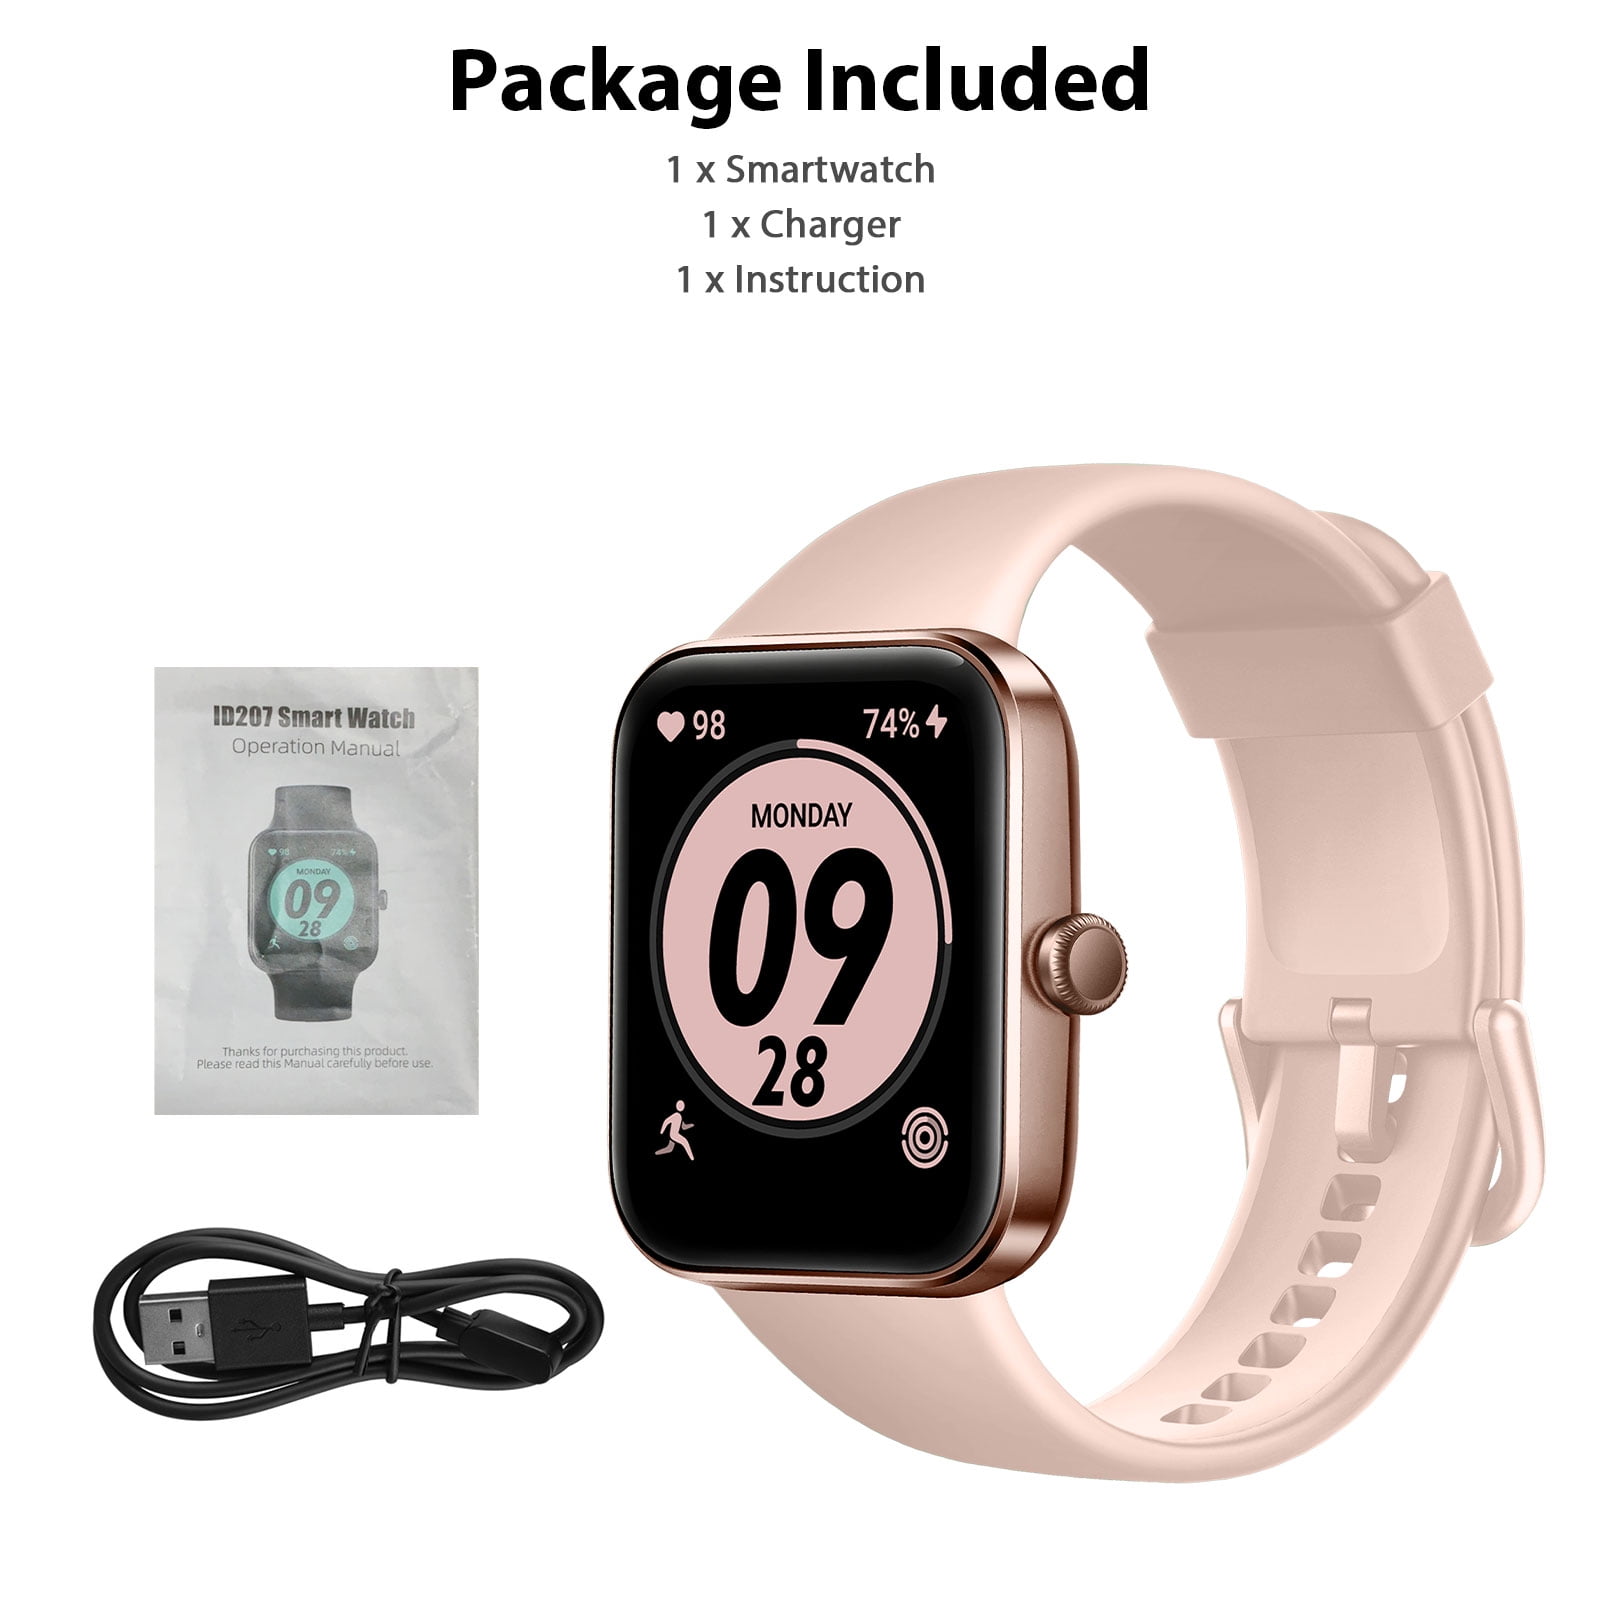 Cubonic HW56+ TouchScreen Smart Watch 30+Dial Faces (Rose Gold) Smartwatch  Price in India - Buy Cubonic HW56+ TouchScreen Smart Watch 30+Dial Faces ( Rose Gold) Smartwatch online at Flipkart.com